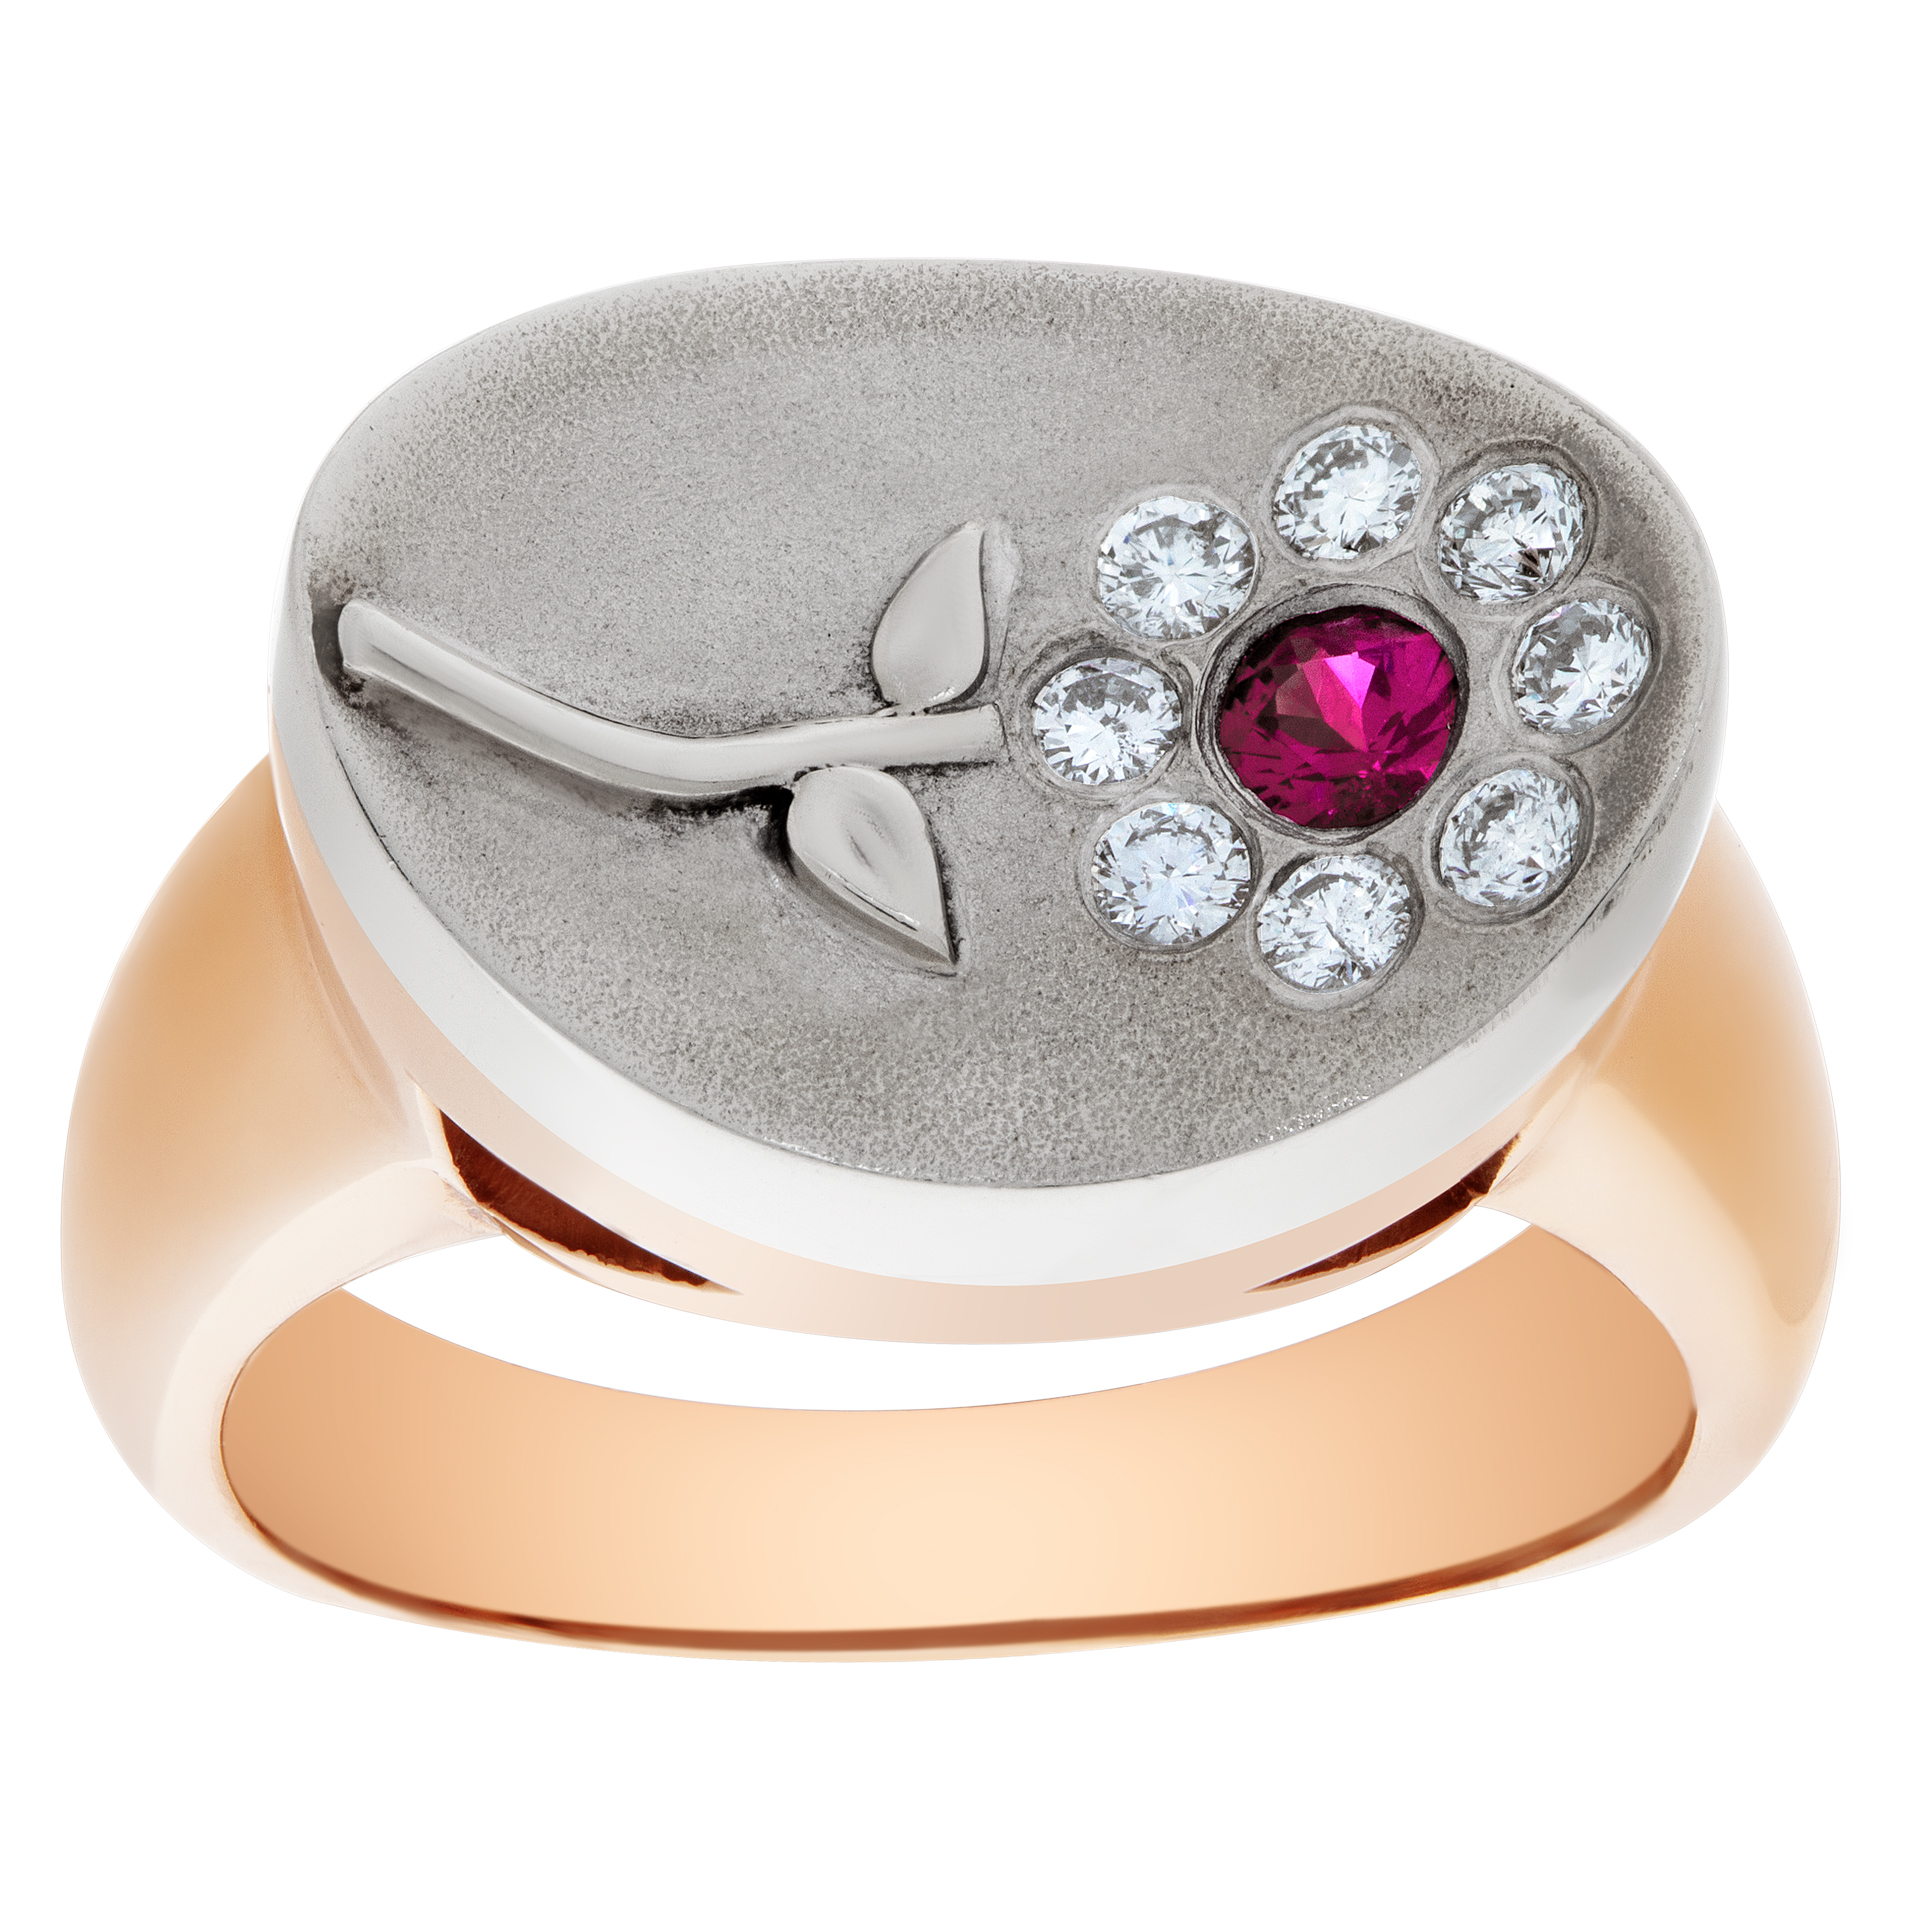 Ruby & diamond flower ring in 14k rose and white gold image 1